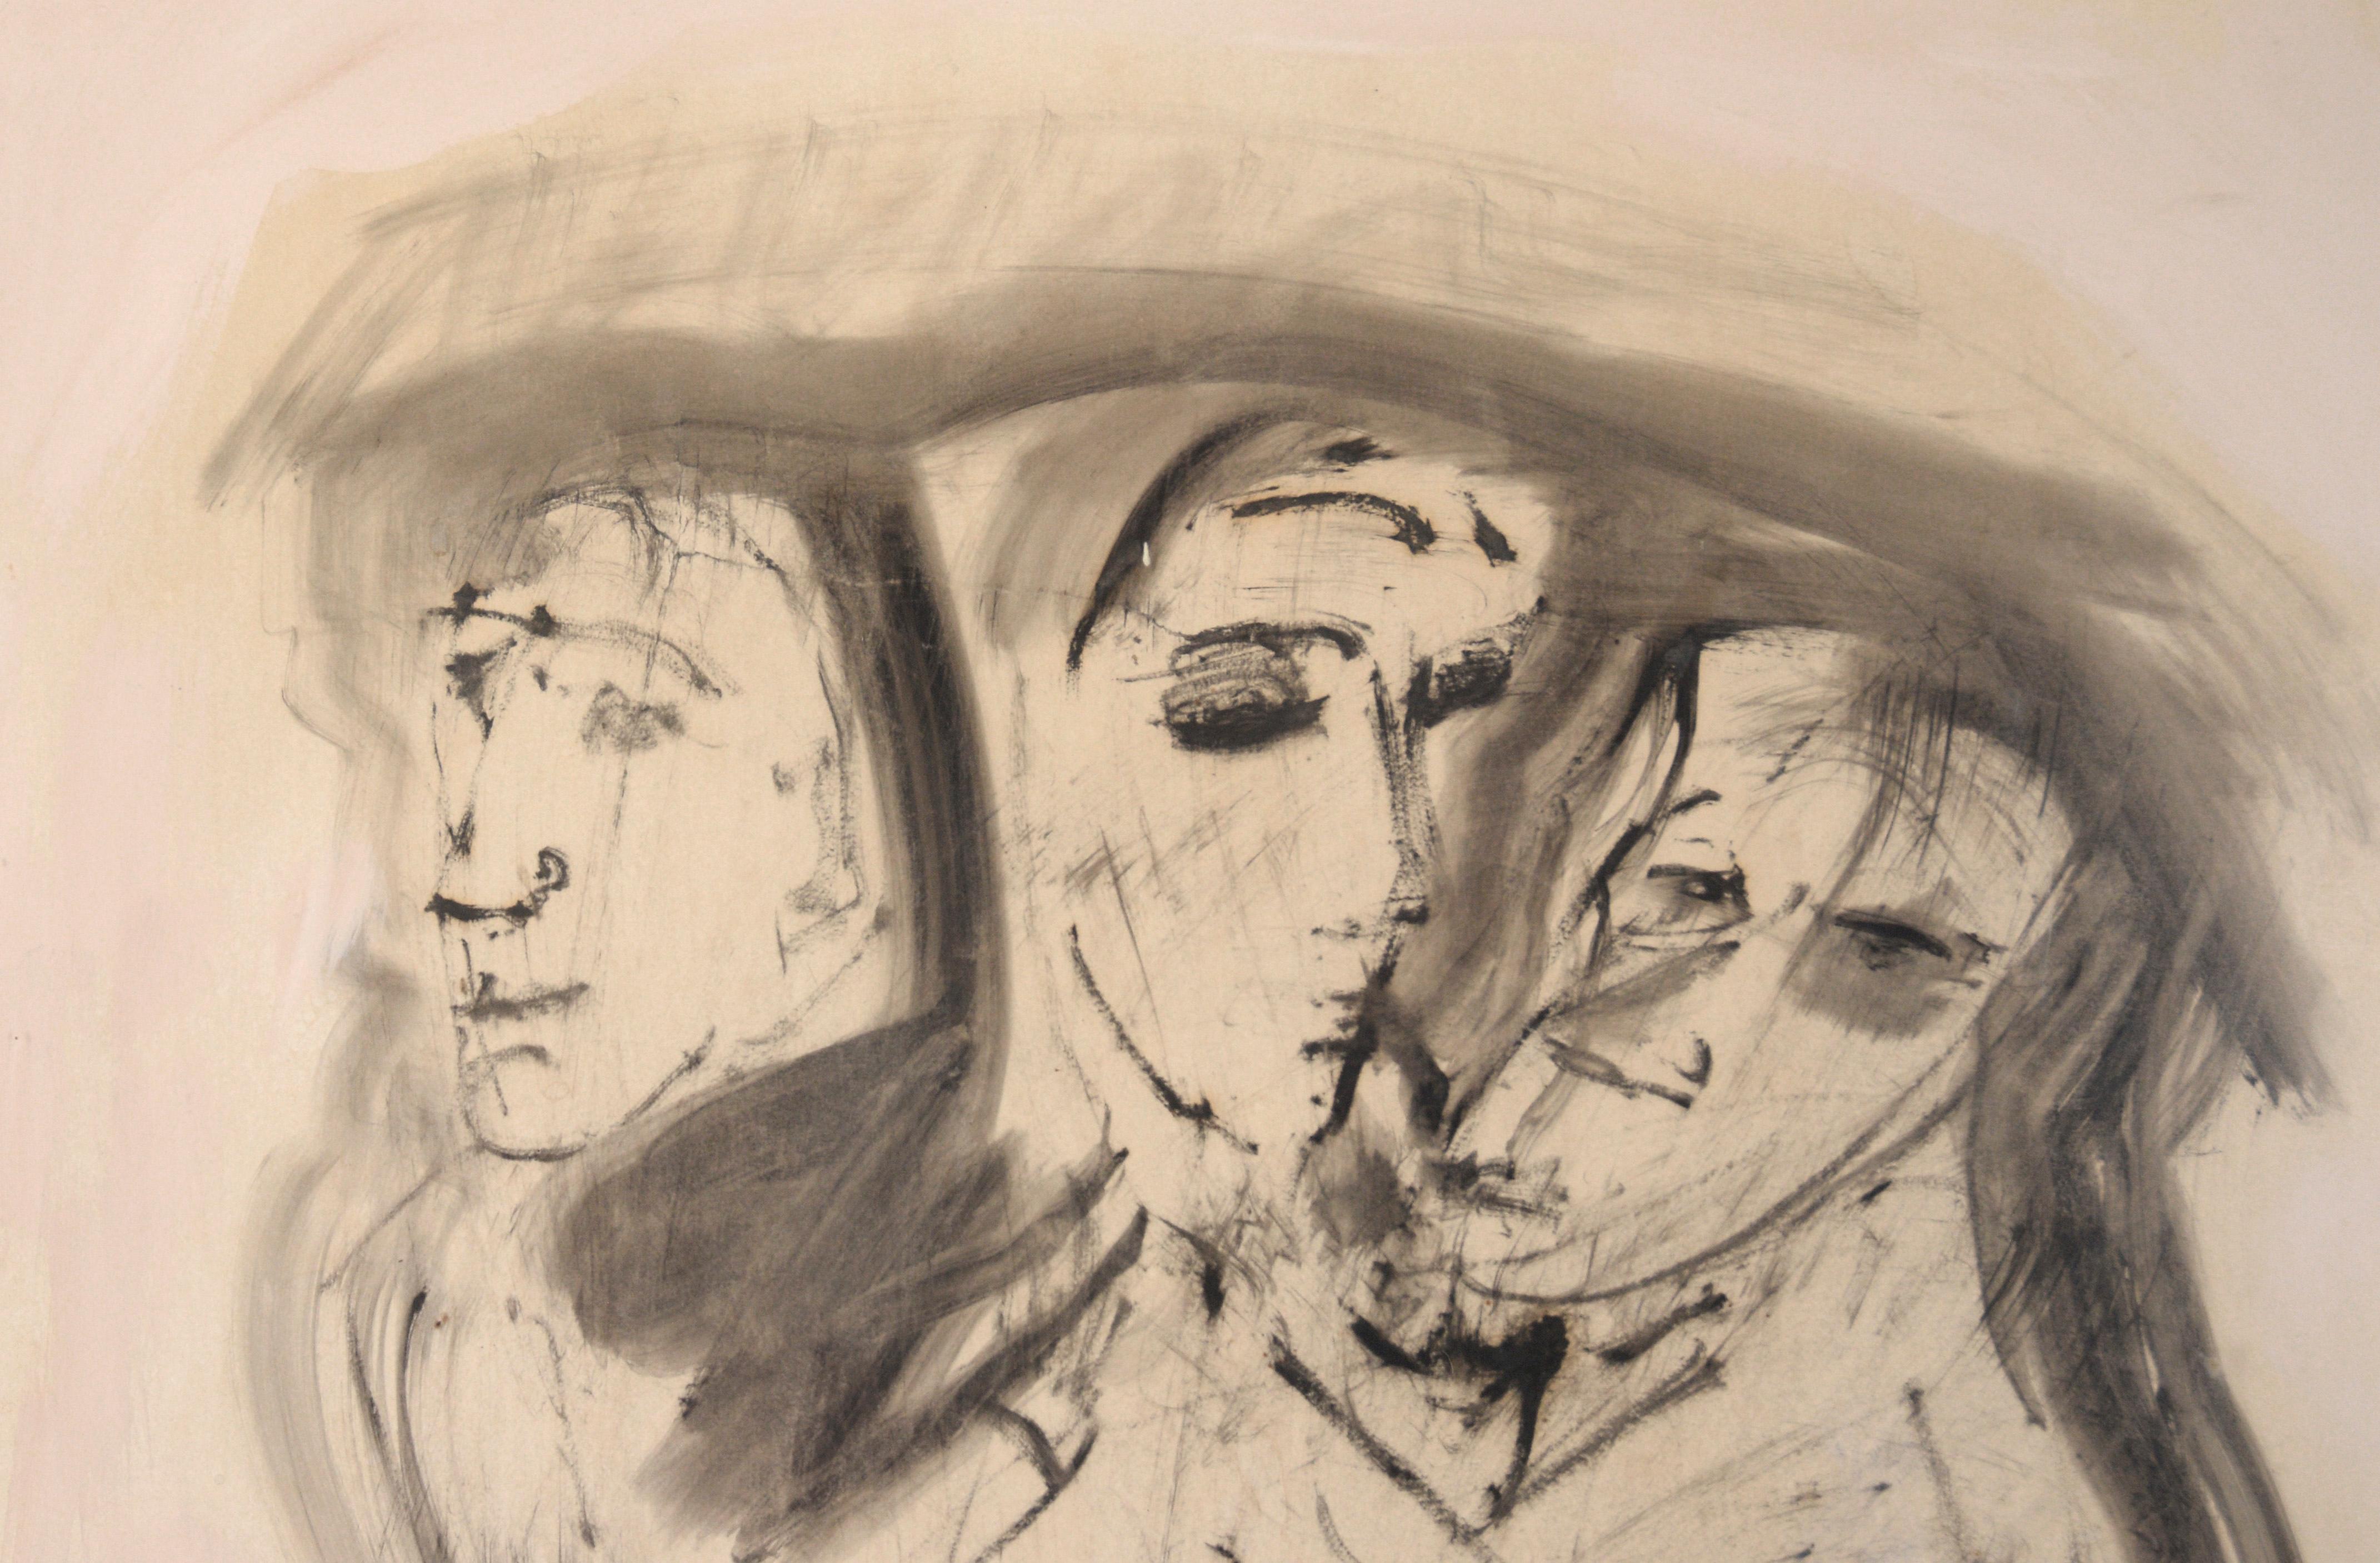 Three Figures - Black and White Illustration in Ink on Paper - Abstract Expressionist Painting by Unknown